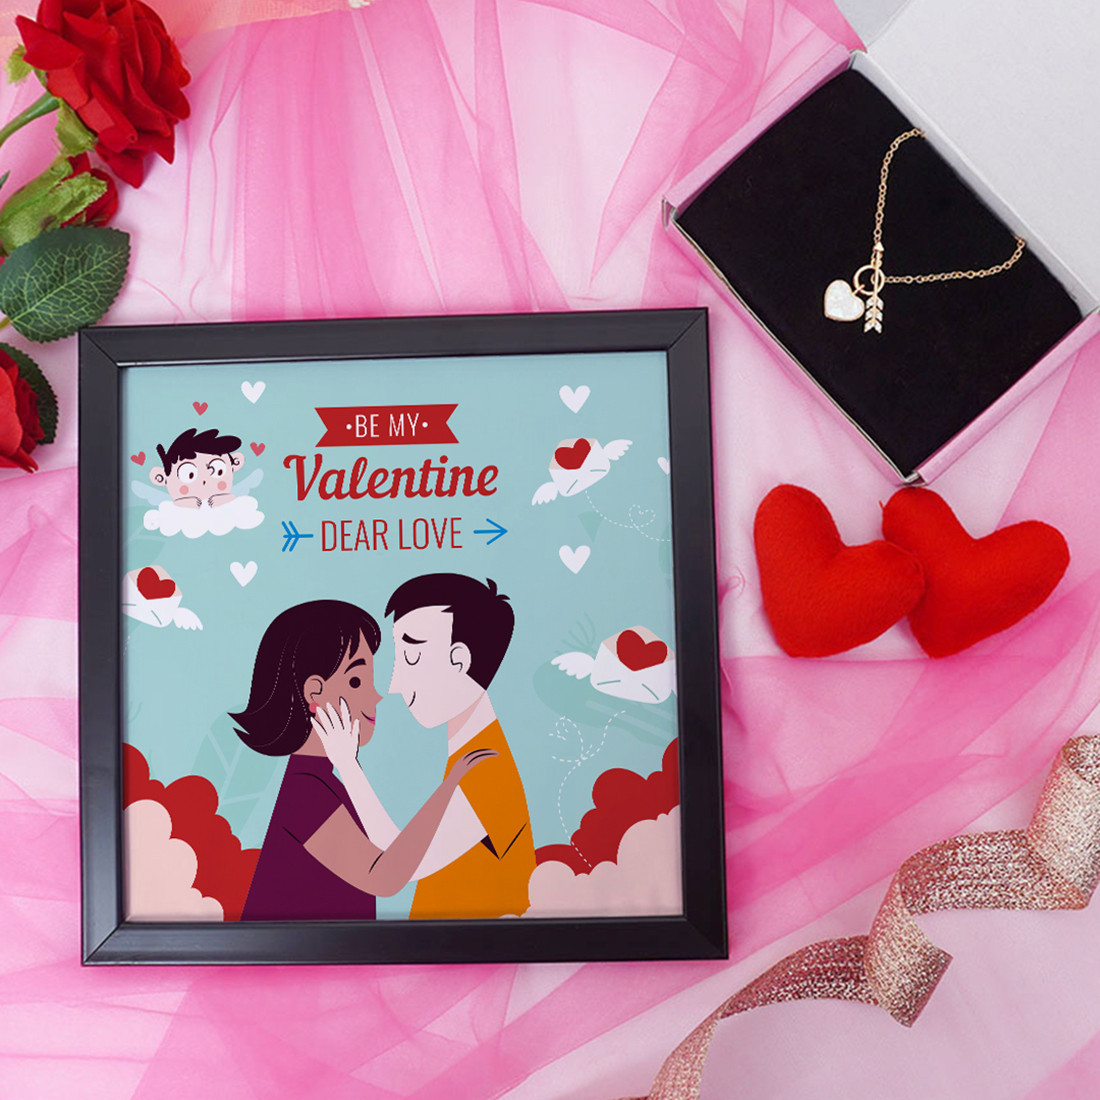 Be My Valentine Dear Love Valentine Gift Set | Valentine's Day Gifts for Girlfriend | Valentine Gift for Wife | Pendant for Girl/Women | Photo Frame (8x8 Inches)